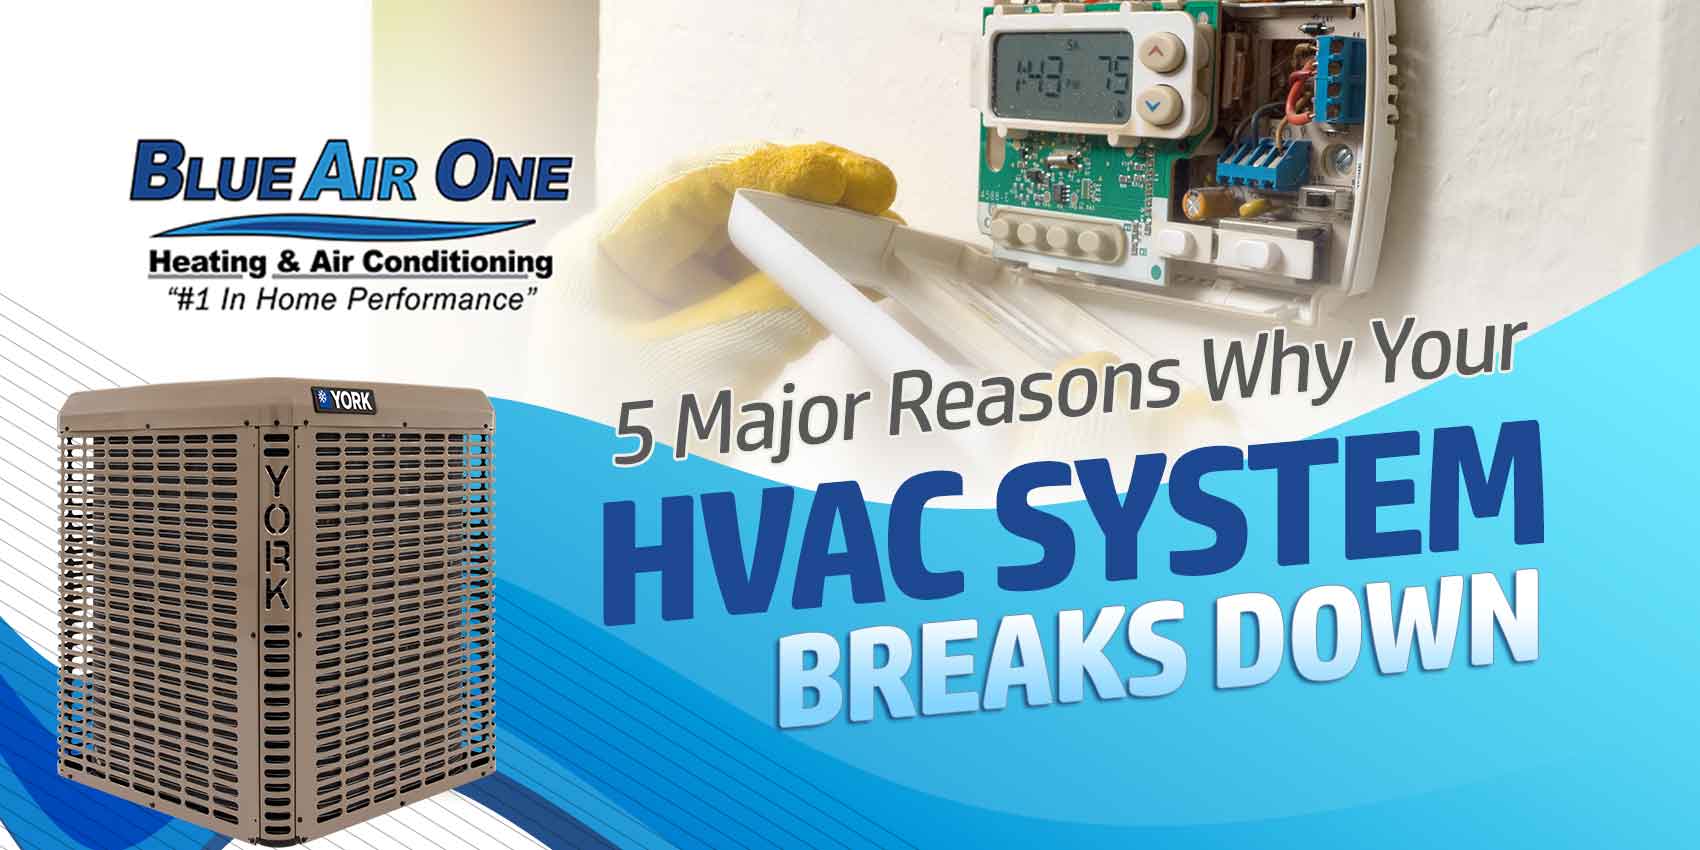 5 Major Reasons Why Your HVAC System Breaks Down